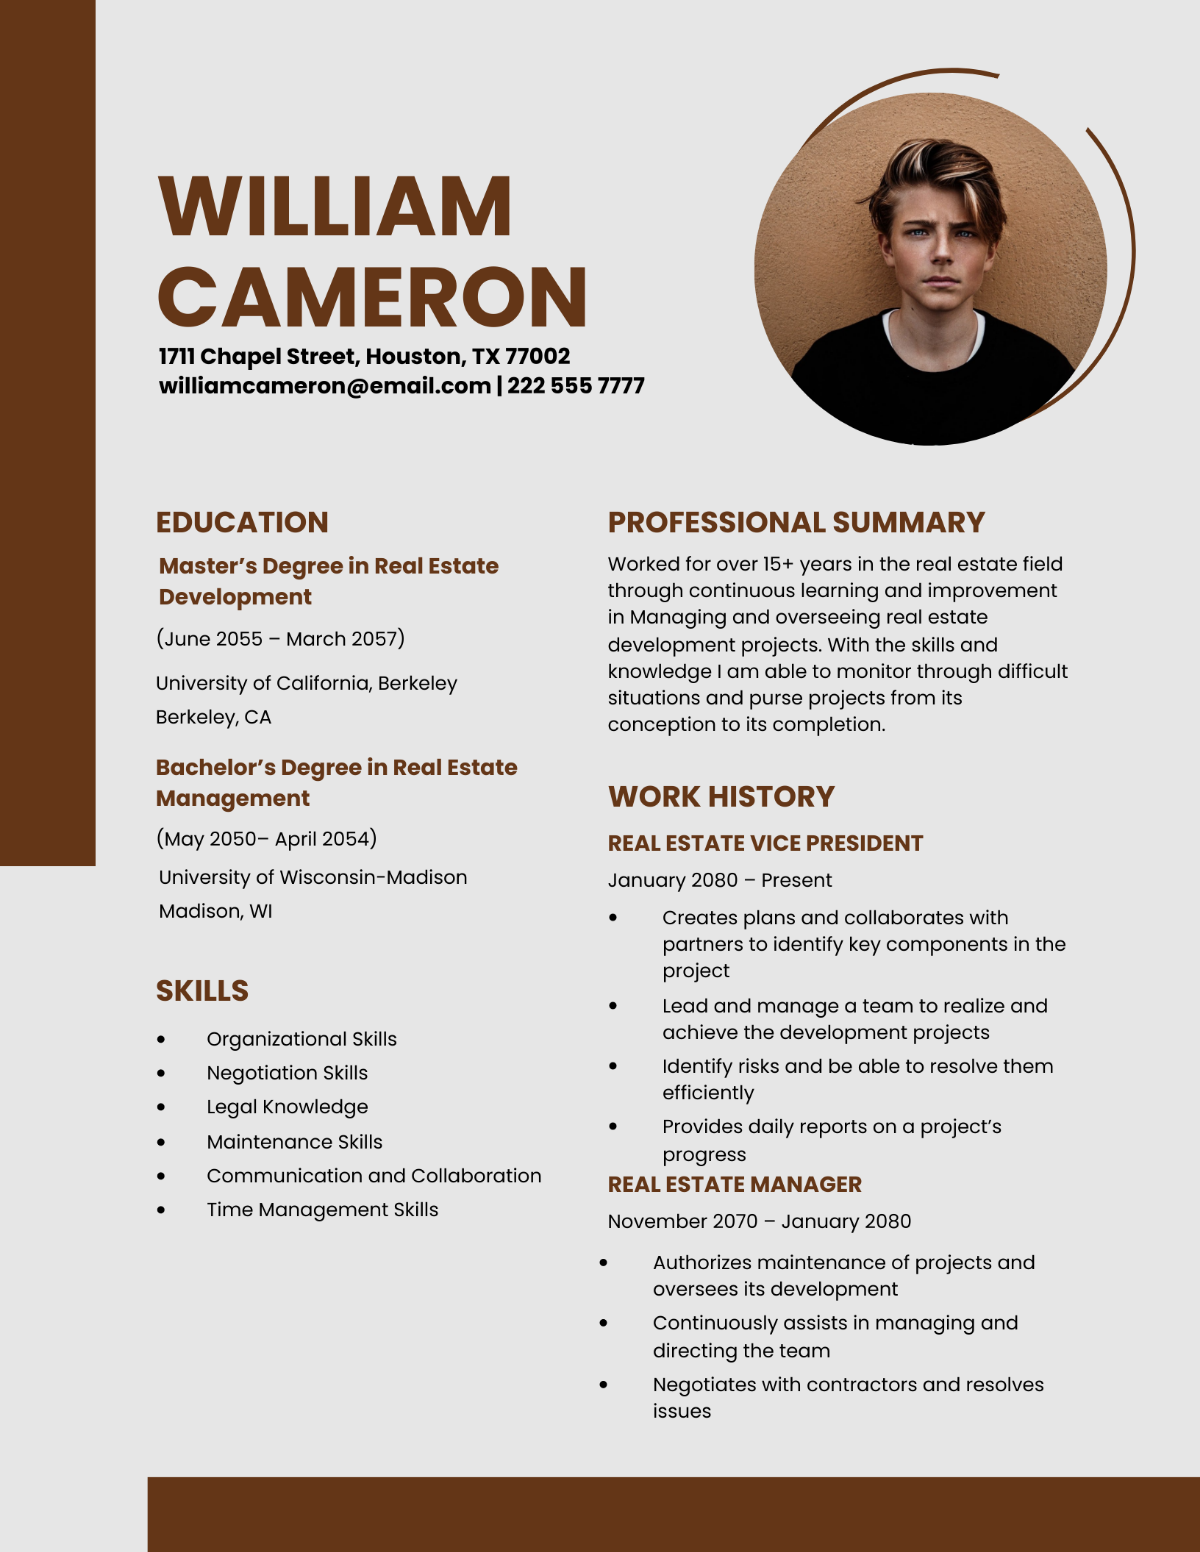 Real Estate Vice President Resume Template